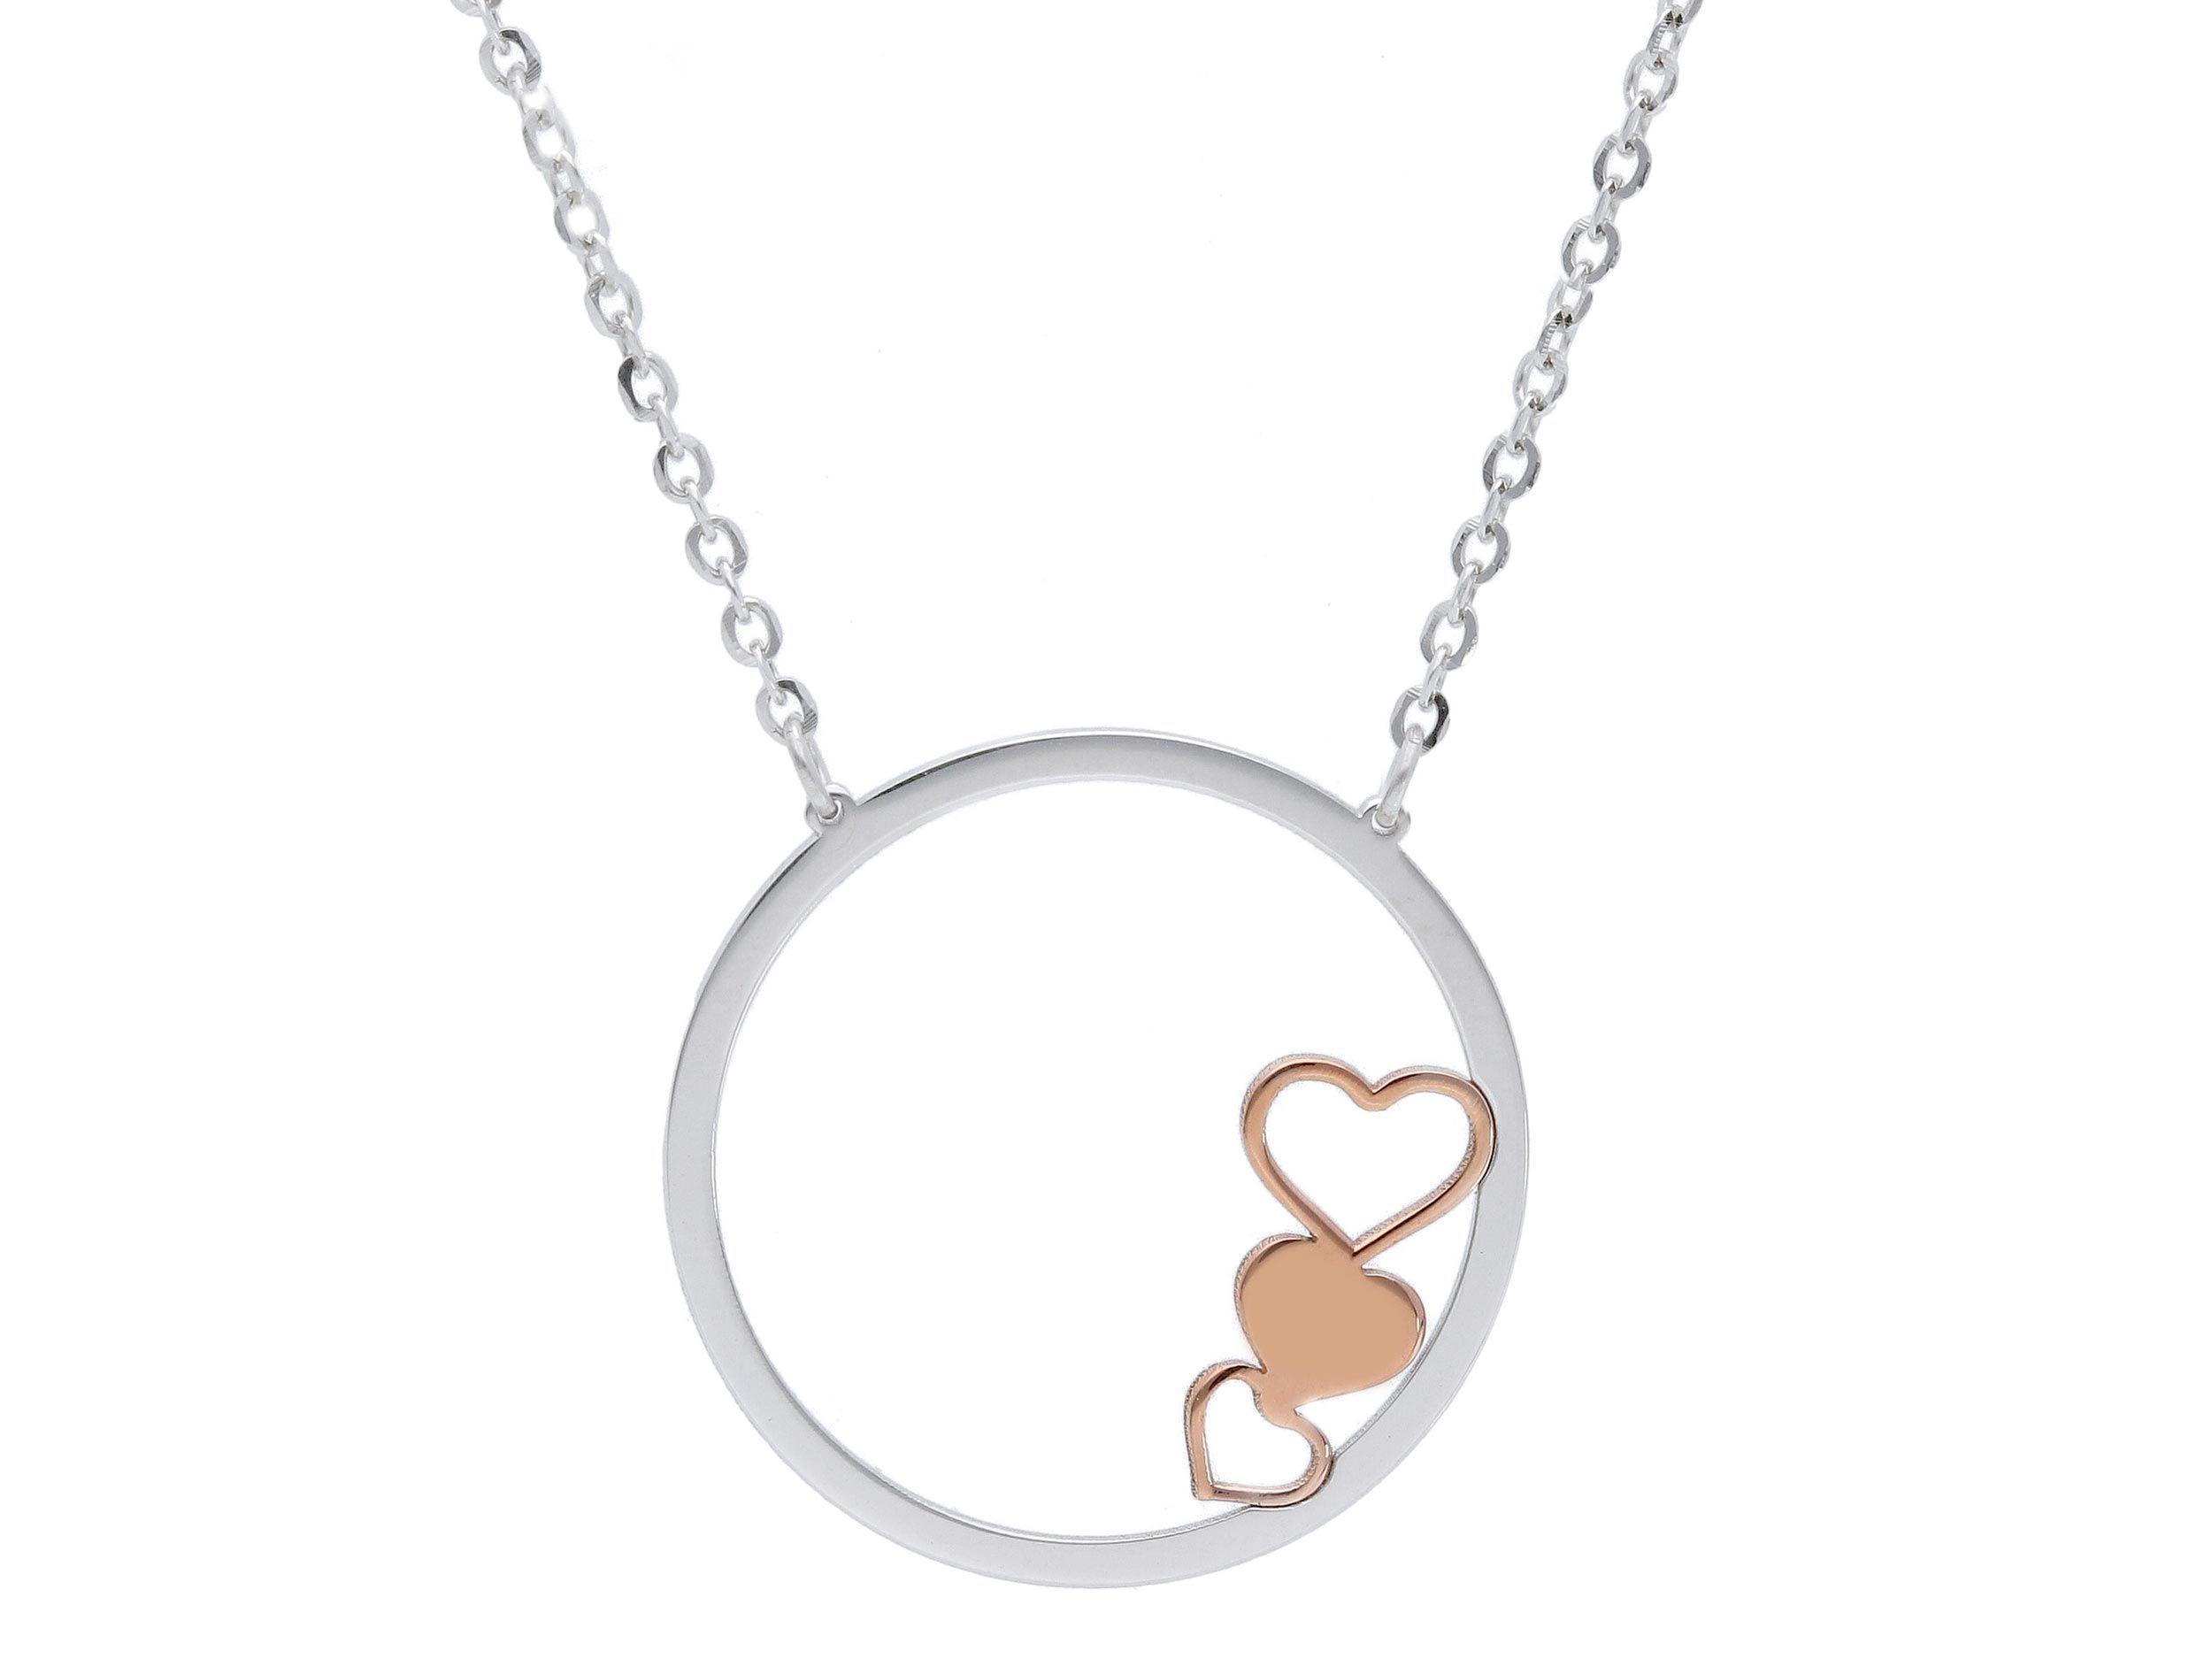 Rose & white gold necklace with little hearts k9 (code S231631)